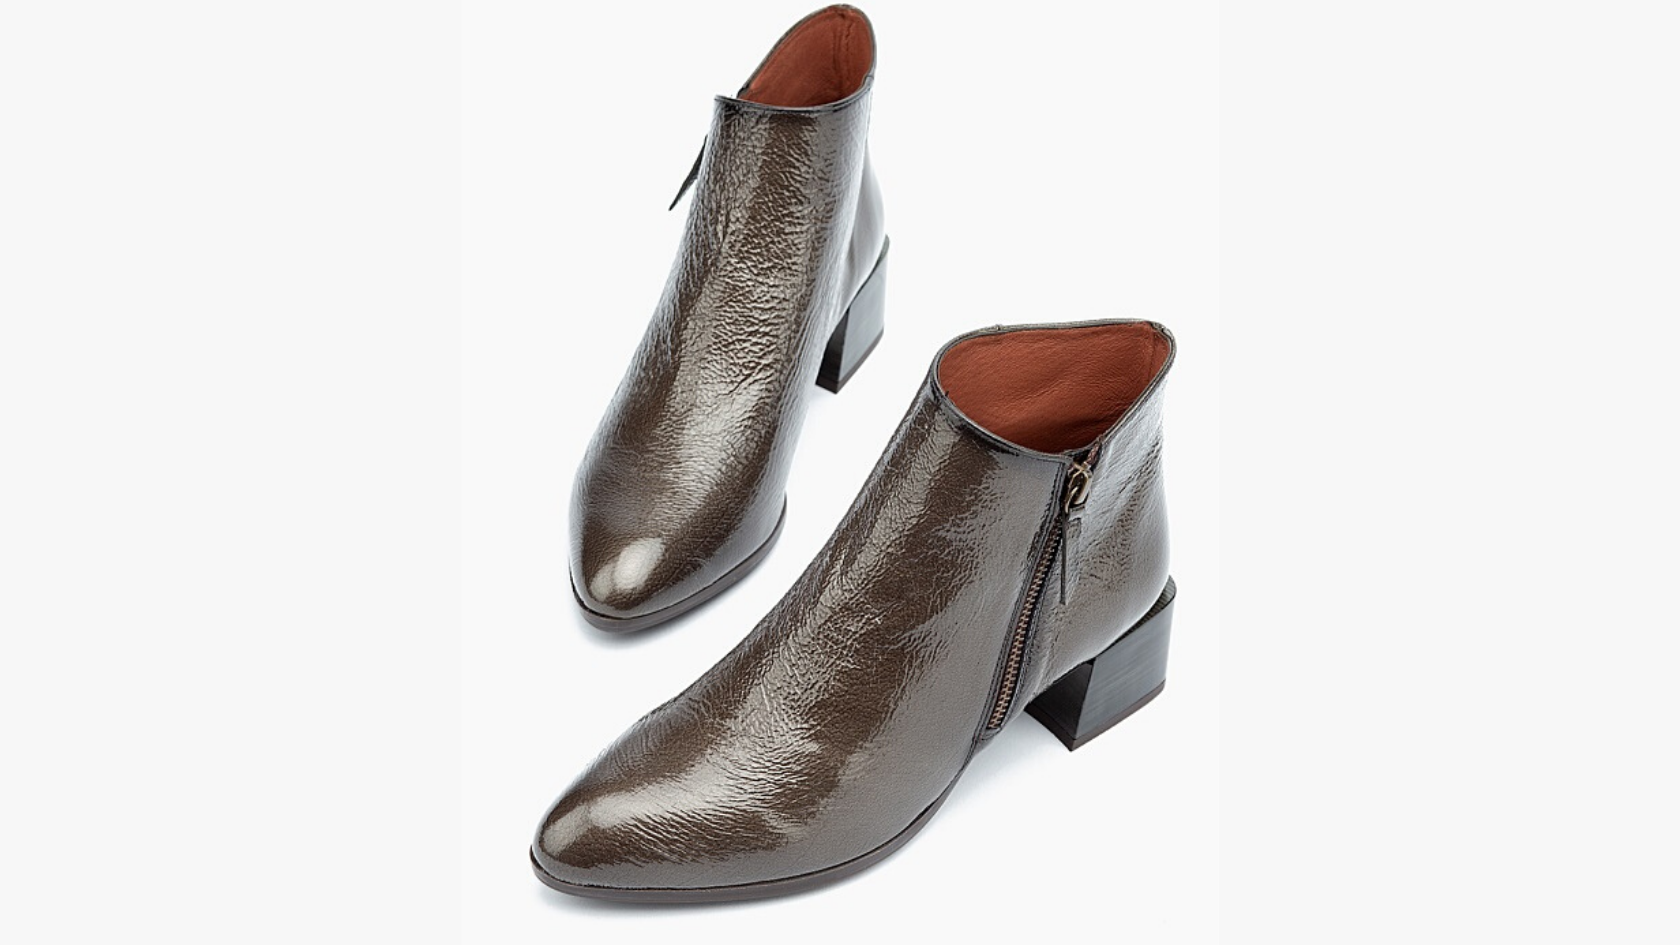 A pair of Hispanitas women’s heeled ankle boots with a taupe patent leather upper against a neutral background.   